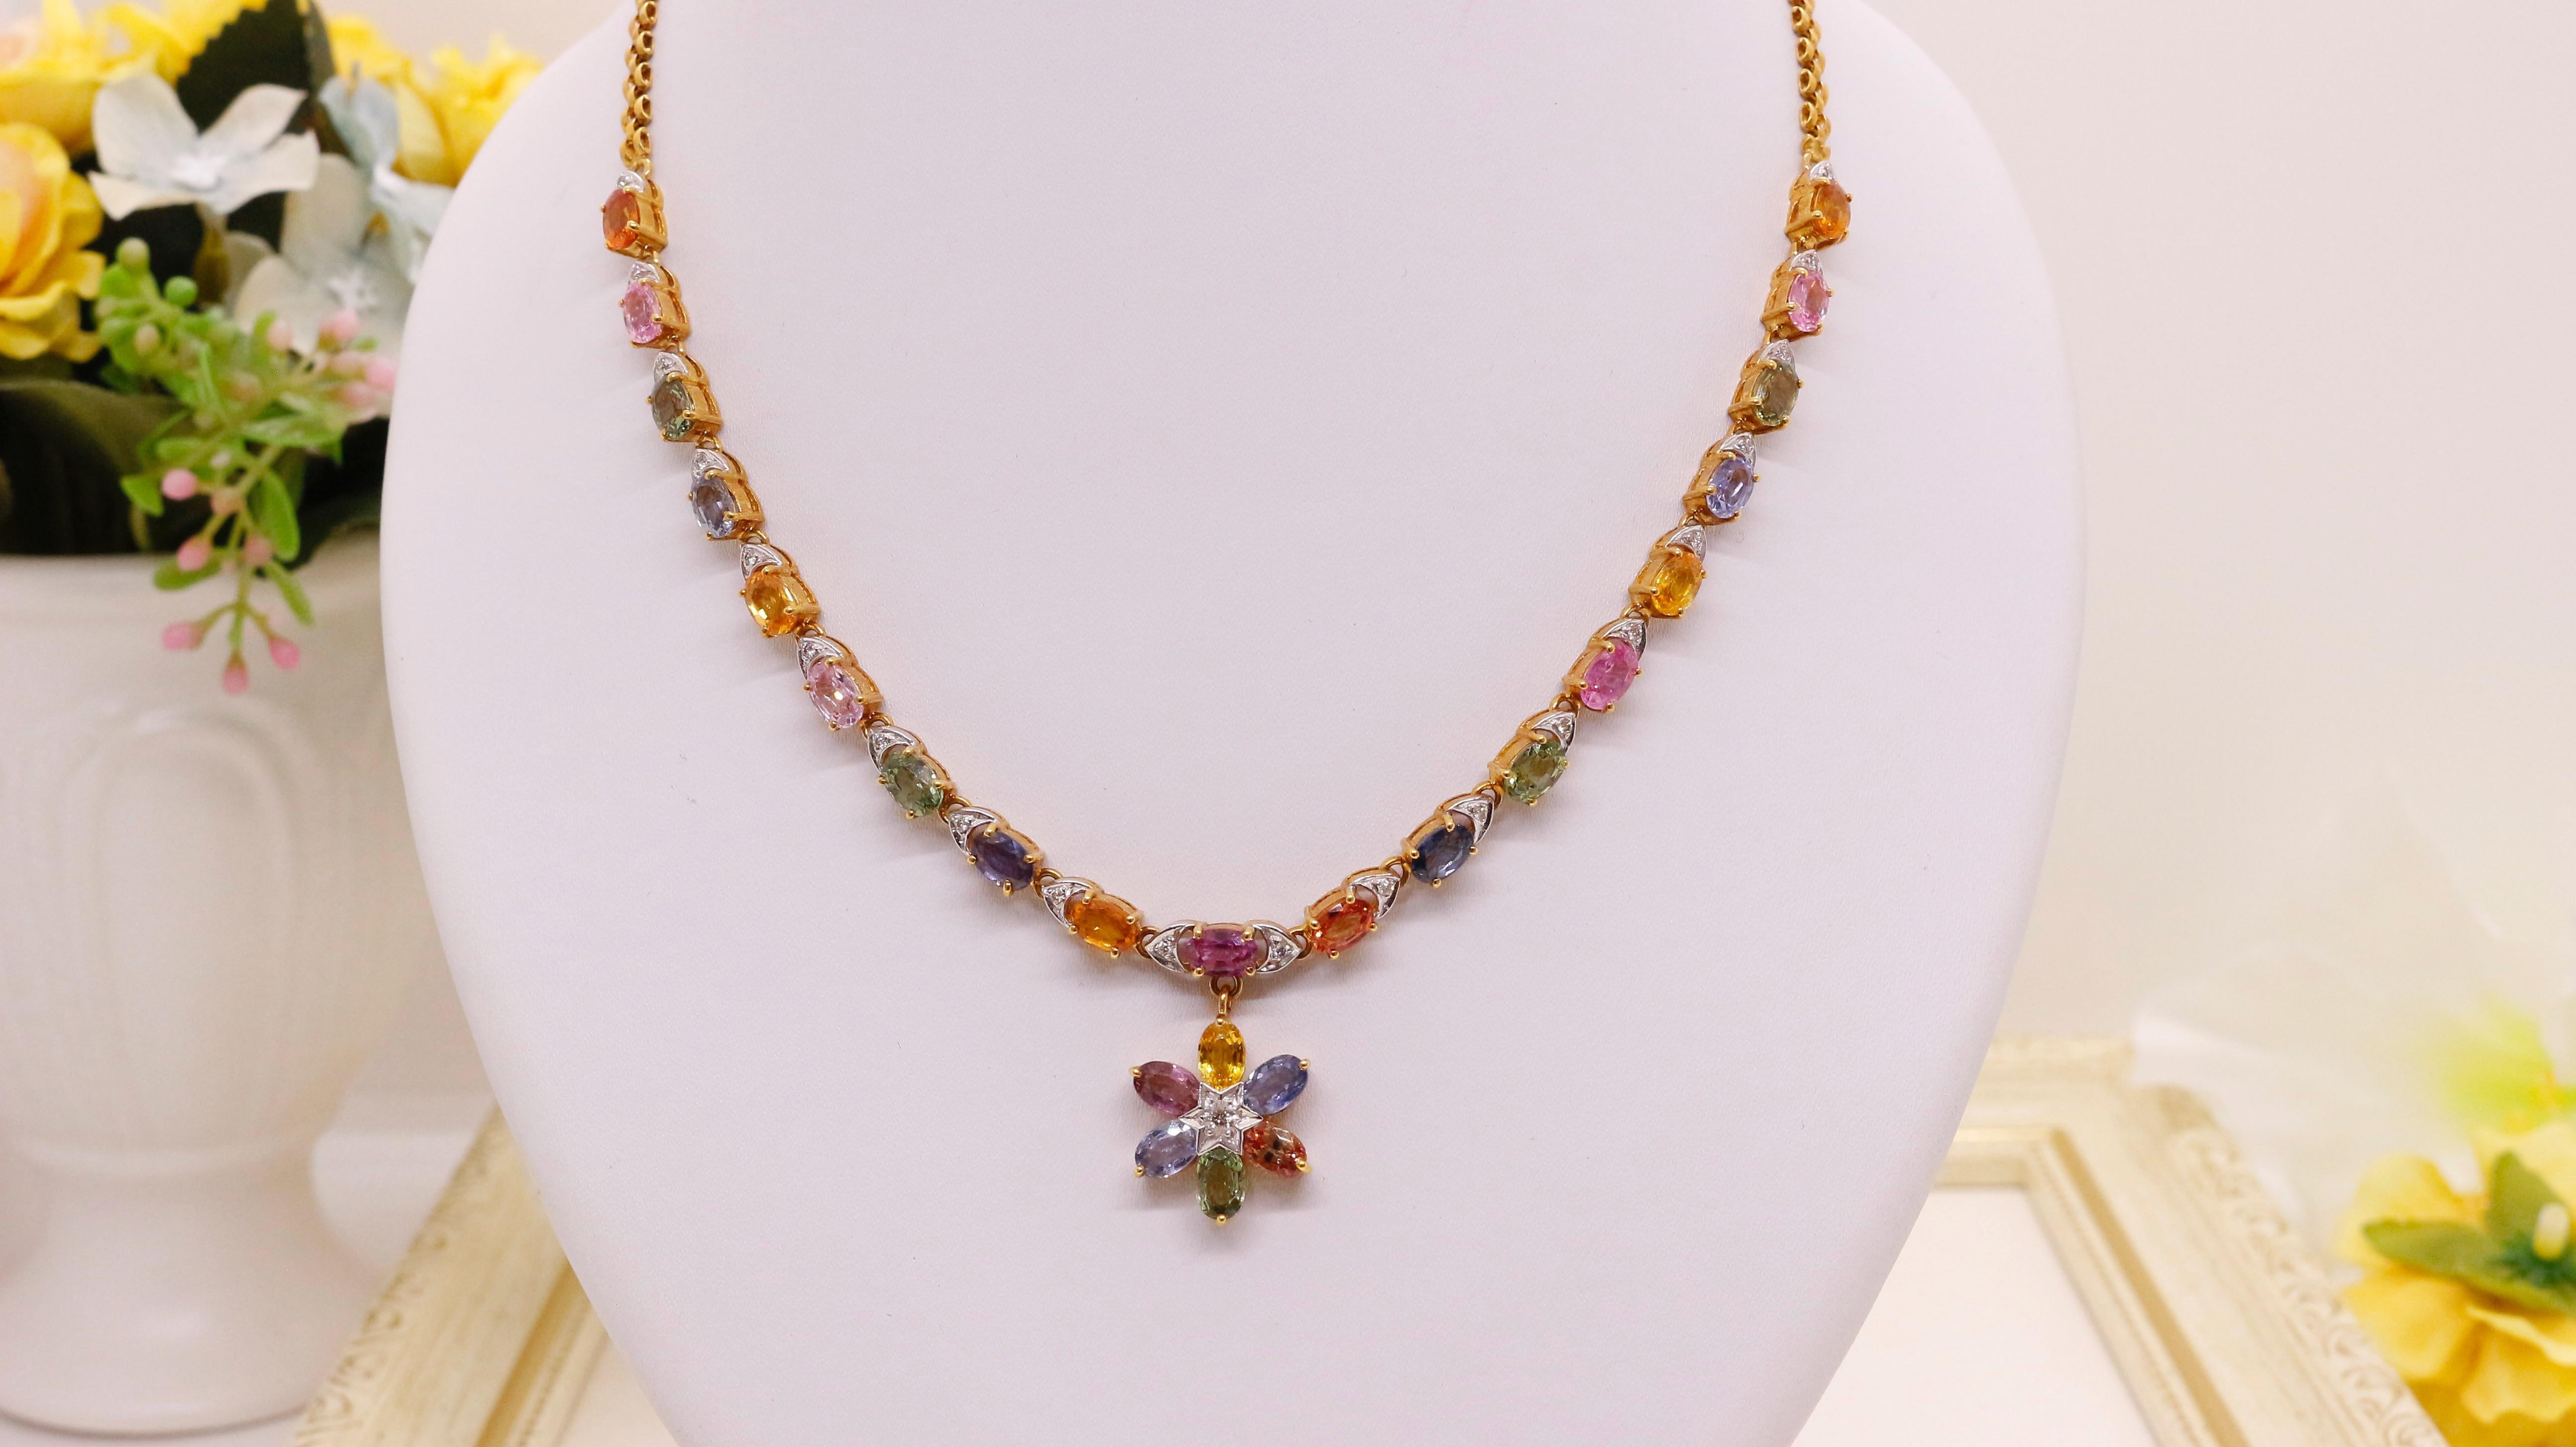 Introducing our exquisite multi-sapphire necklace! This stunning piece of jewelry is a true showstopper, featuring a collection of faceted sapphires in various vibrant colors. From brilliant blues to captivating pinks, yellows, and greens, each